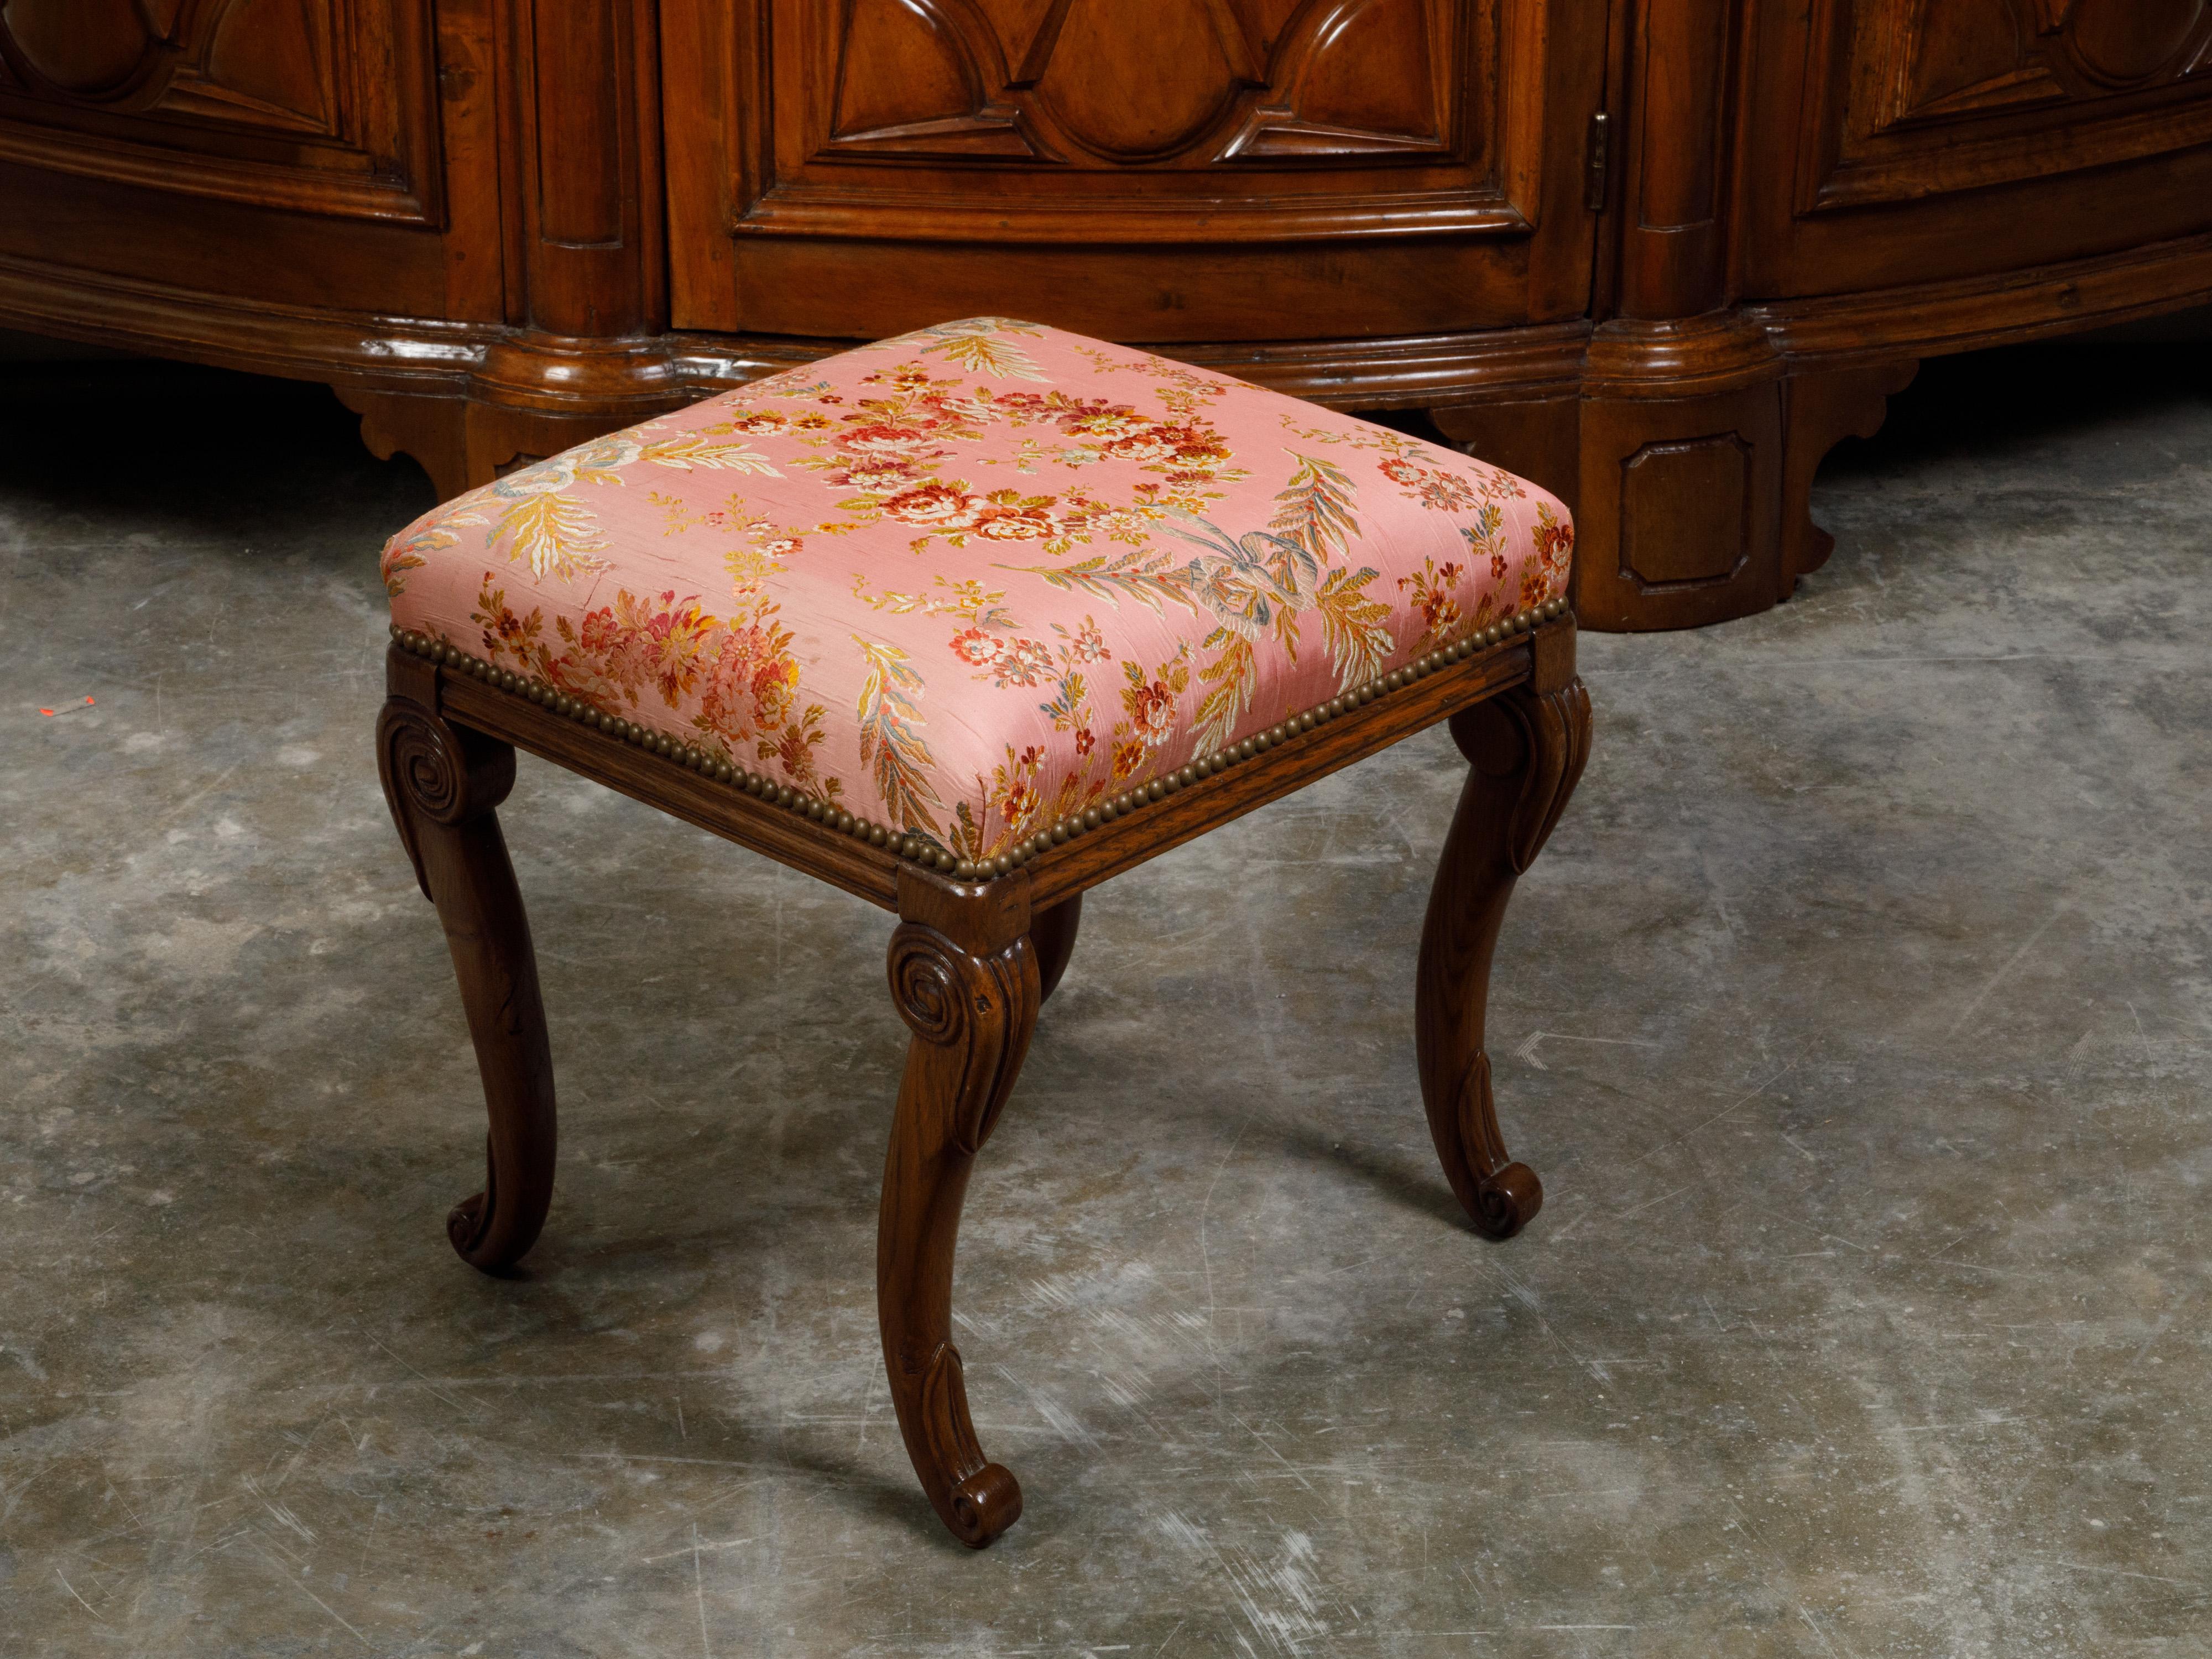 English 1820s Mahogany Stool with Floral Themed Upholstery and Cabriole Legs For Sale 3